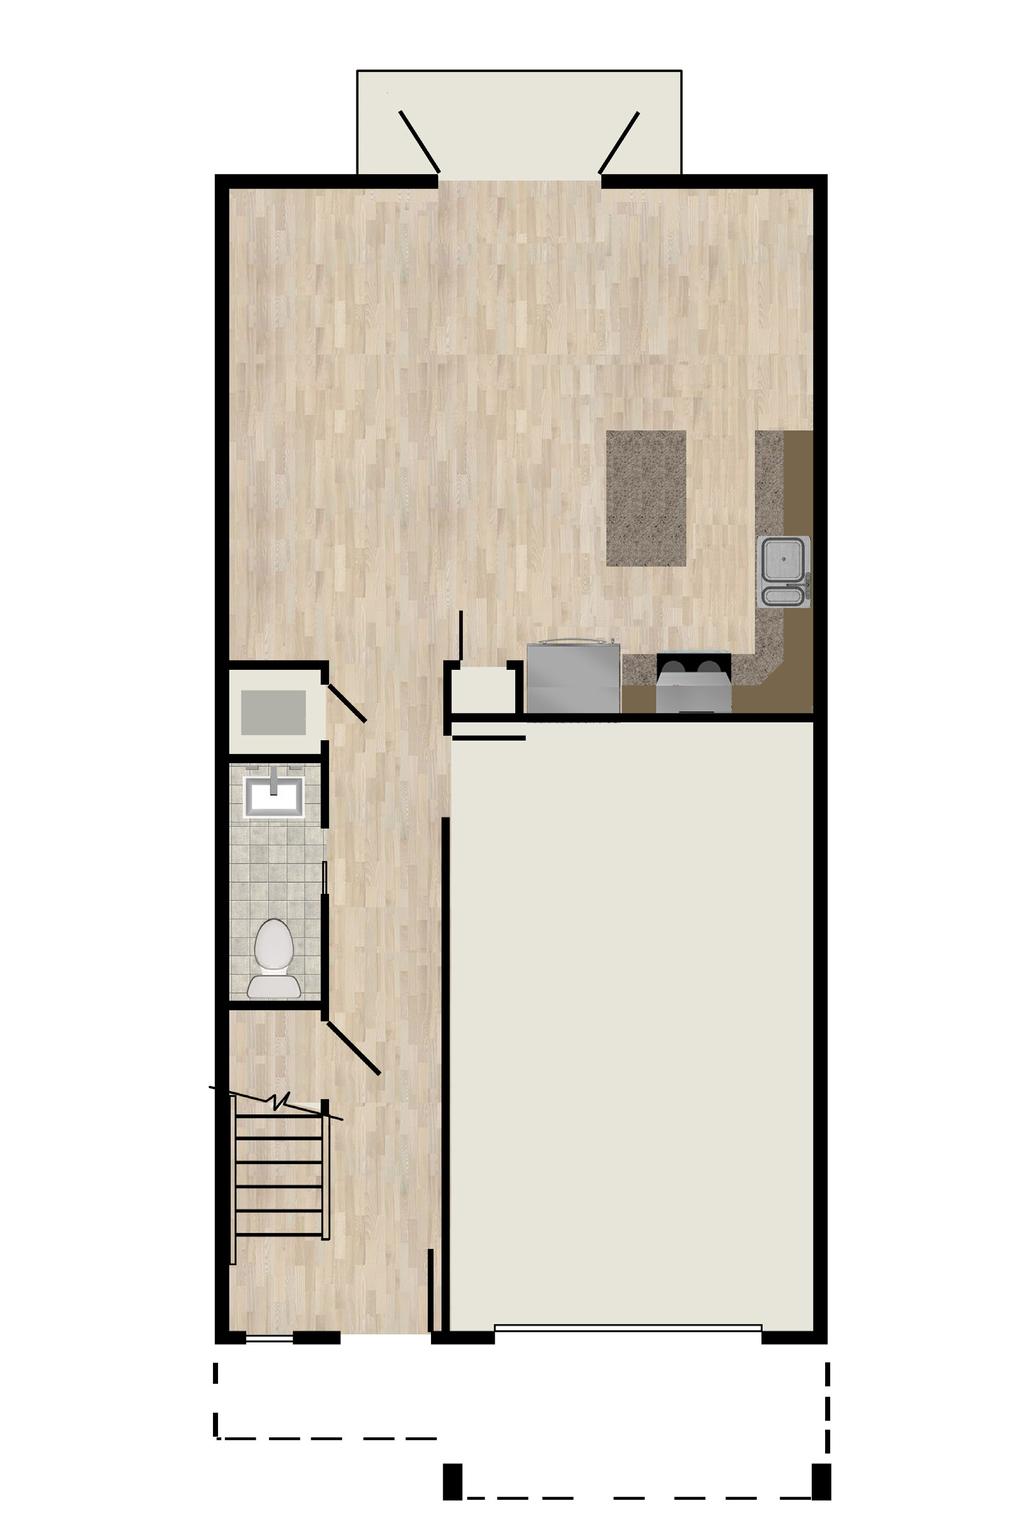 10 APPROX. 1351 SQ FT 3 BEDROOMS 2.